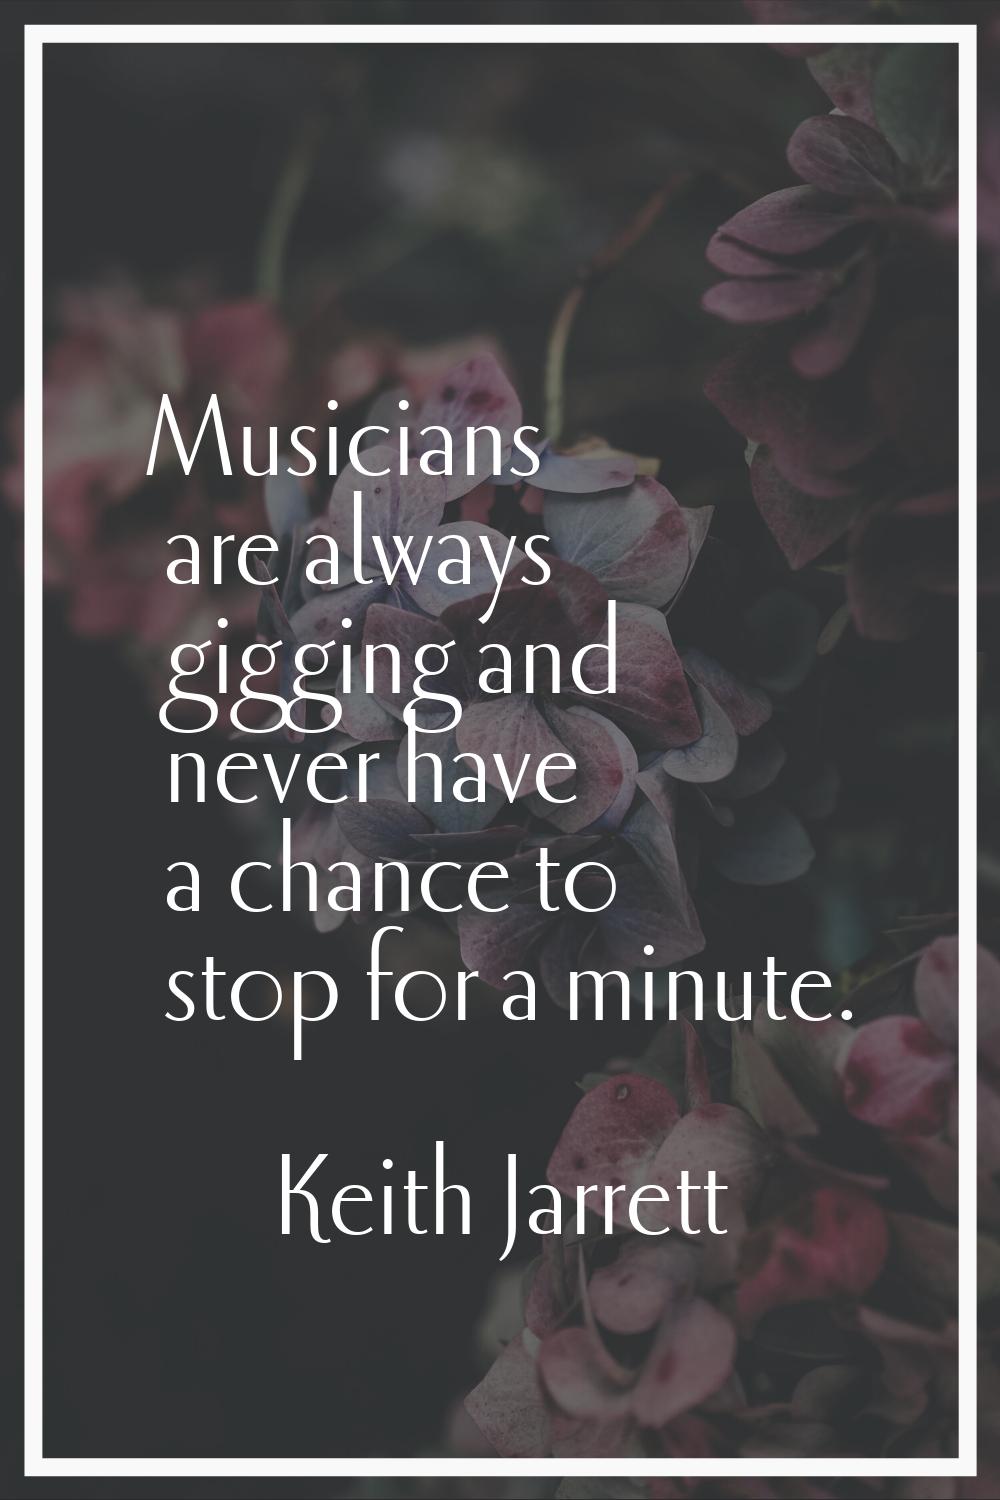 Musicians are always gigging and never have a chance to stop for a minute.